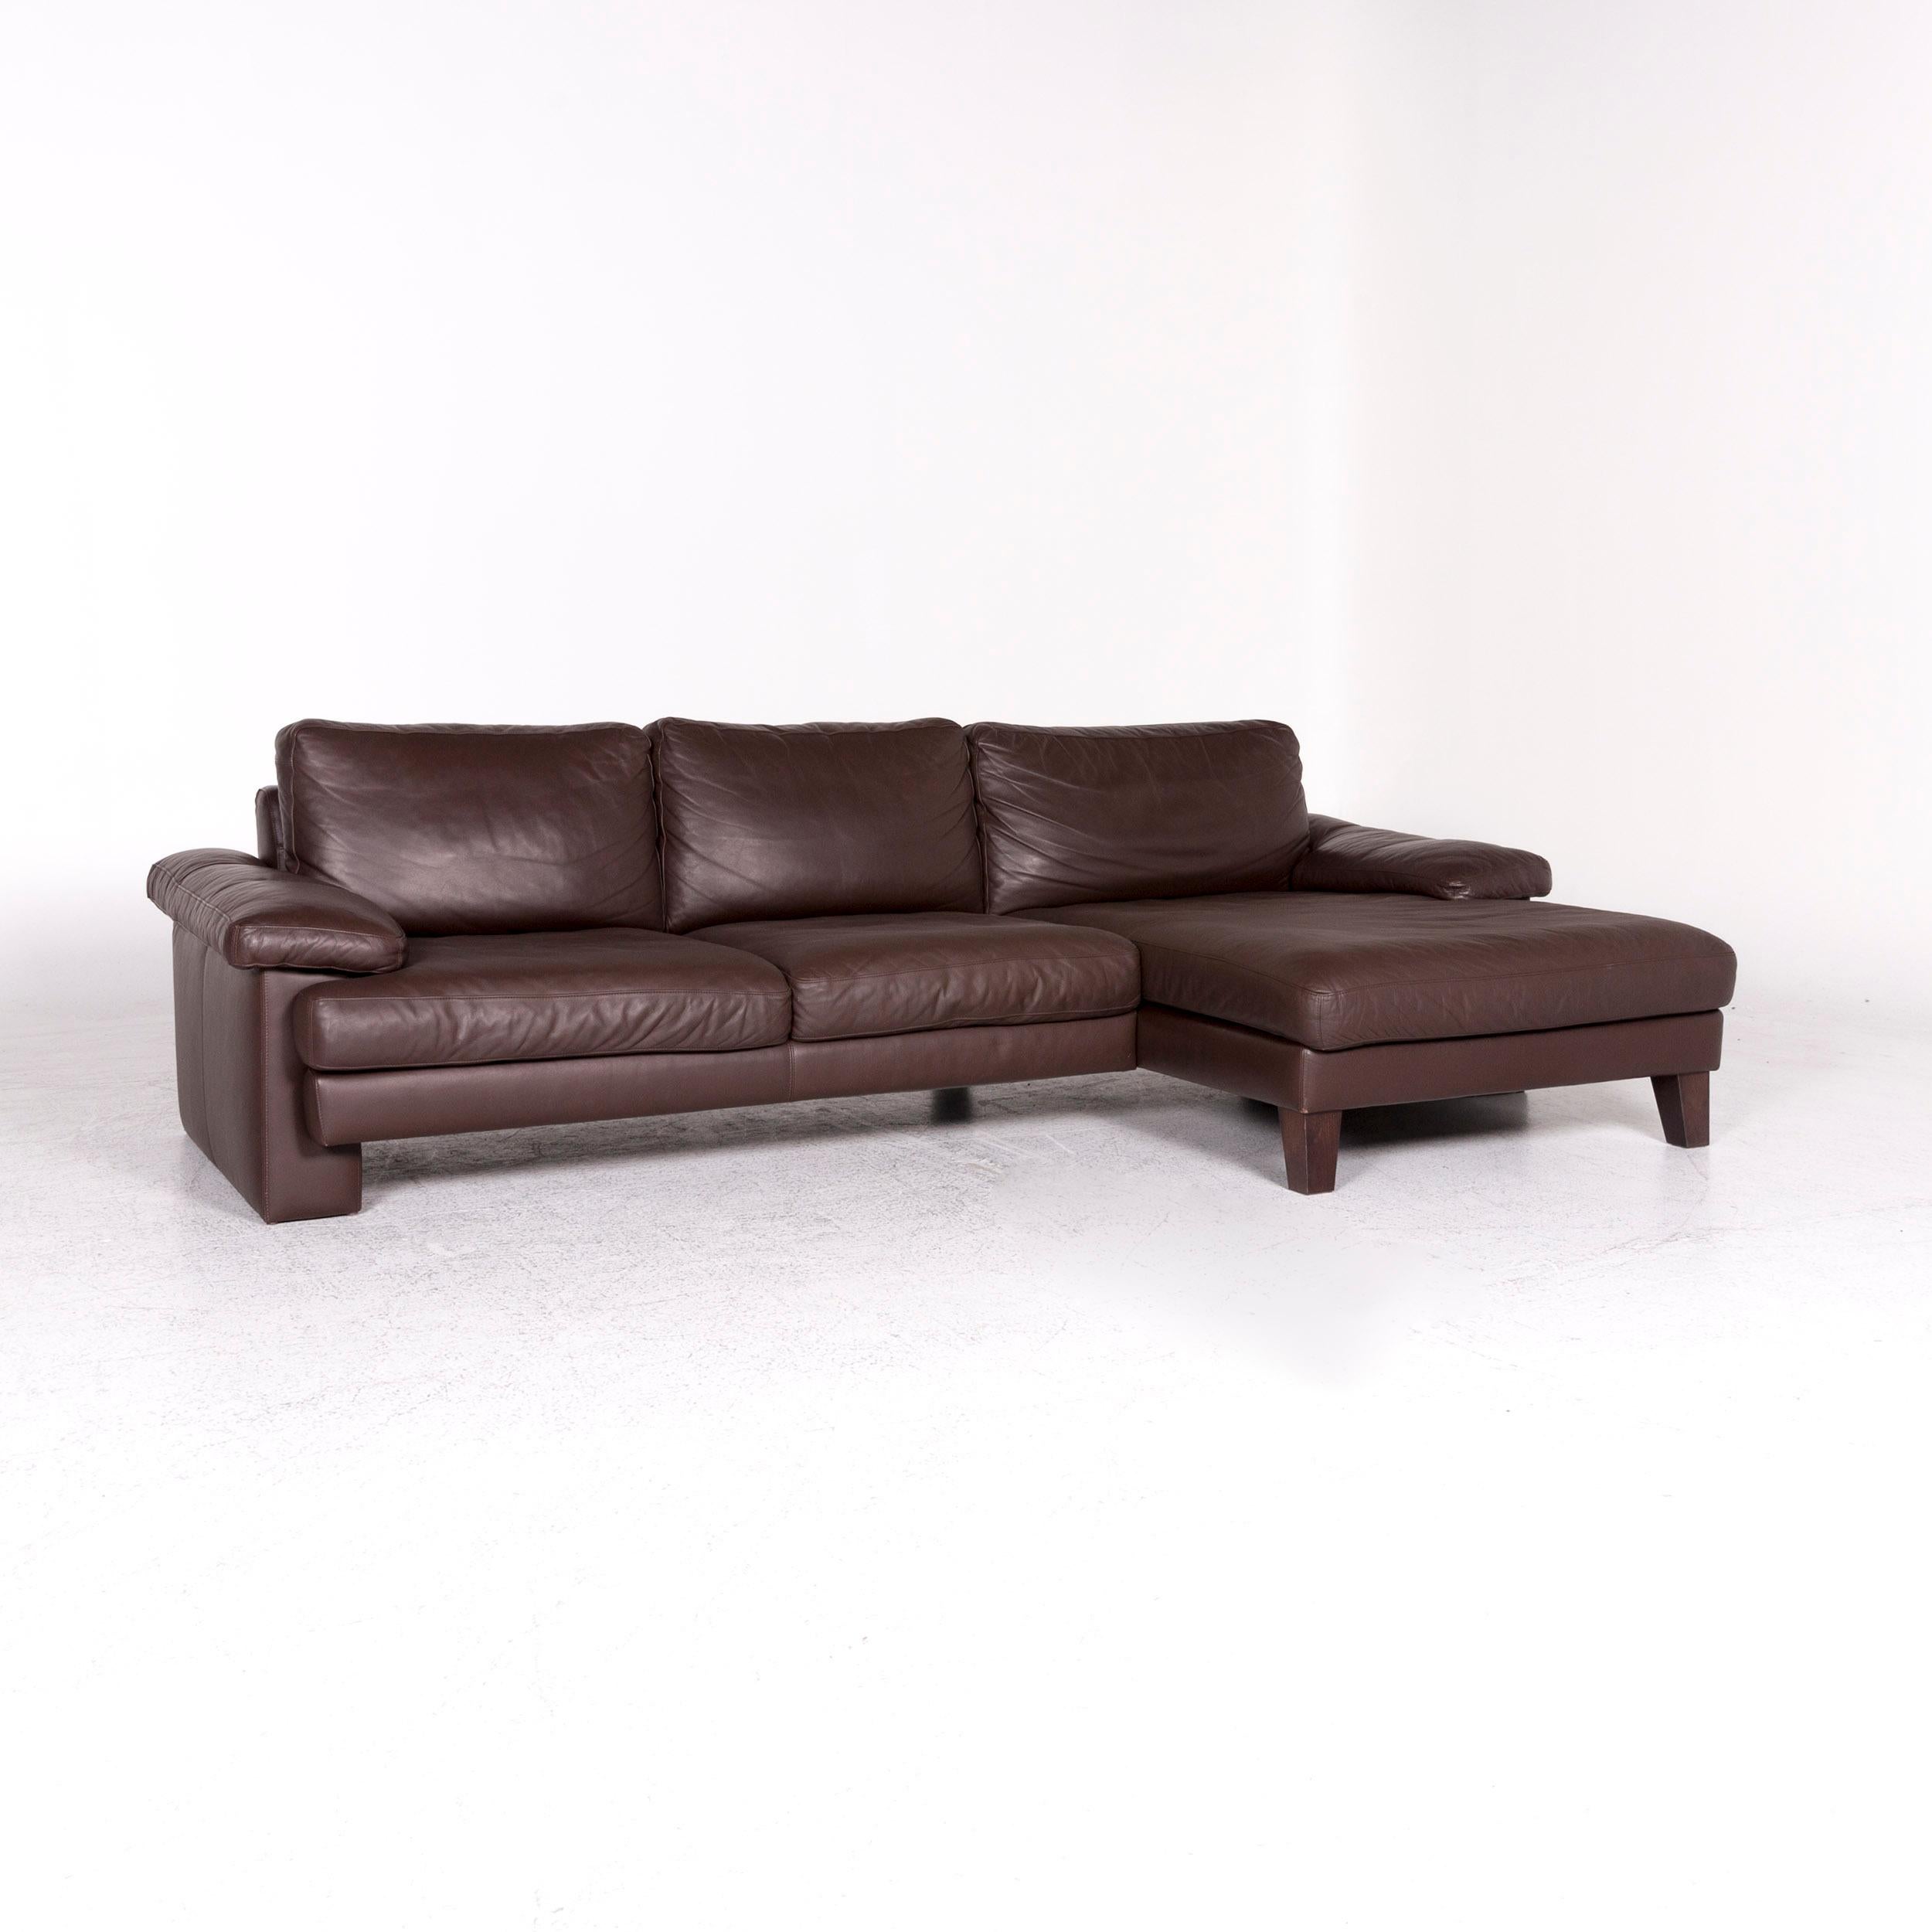 We bring to you a Machalke leather corner sofa brown sofa couch.

 
 Product measurements in centimeters:
 
Depth: 162
Width: 285
Height: 82
Seat-height: 44
Rest-height: 56
Seat-depth: 64
Seat-width: 220
Back-height: 40.